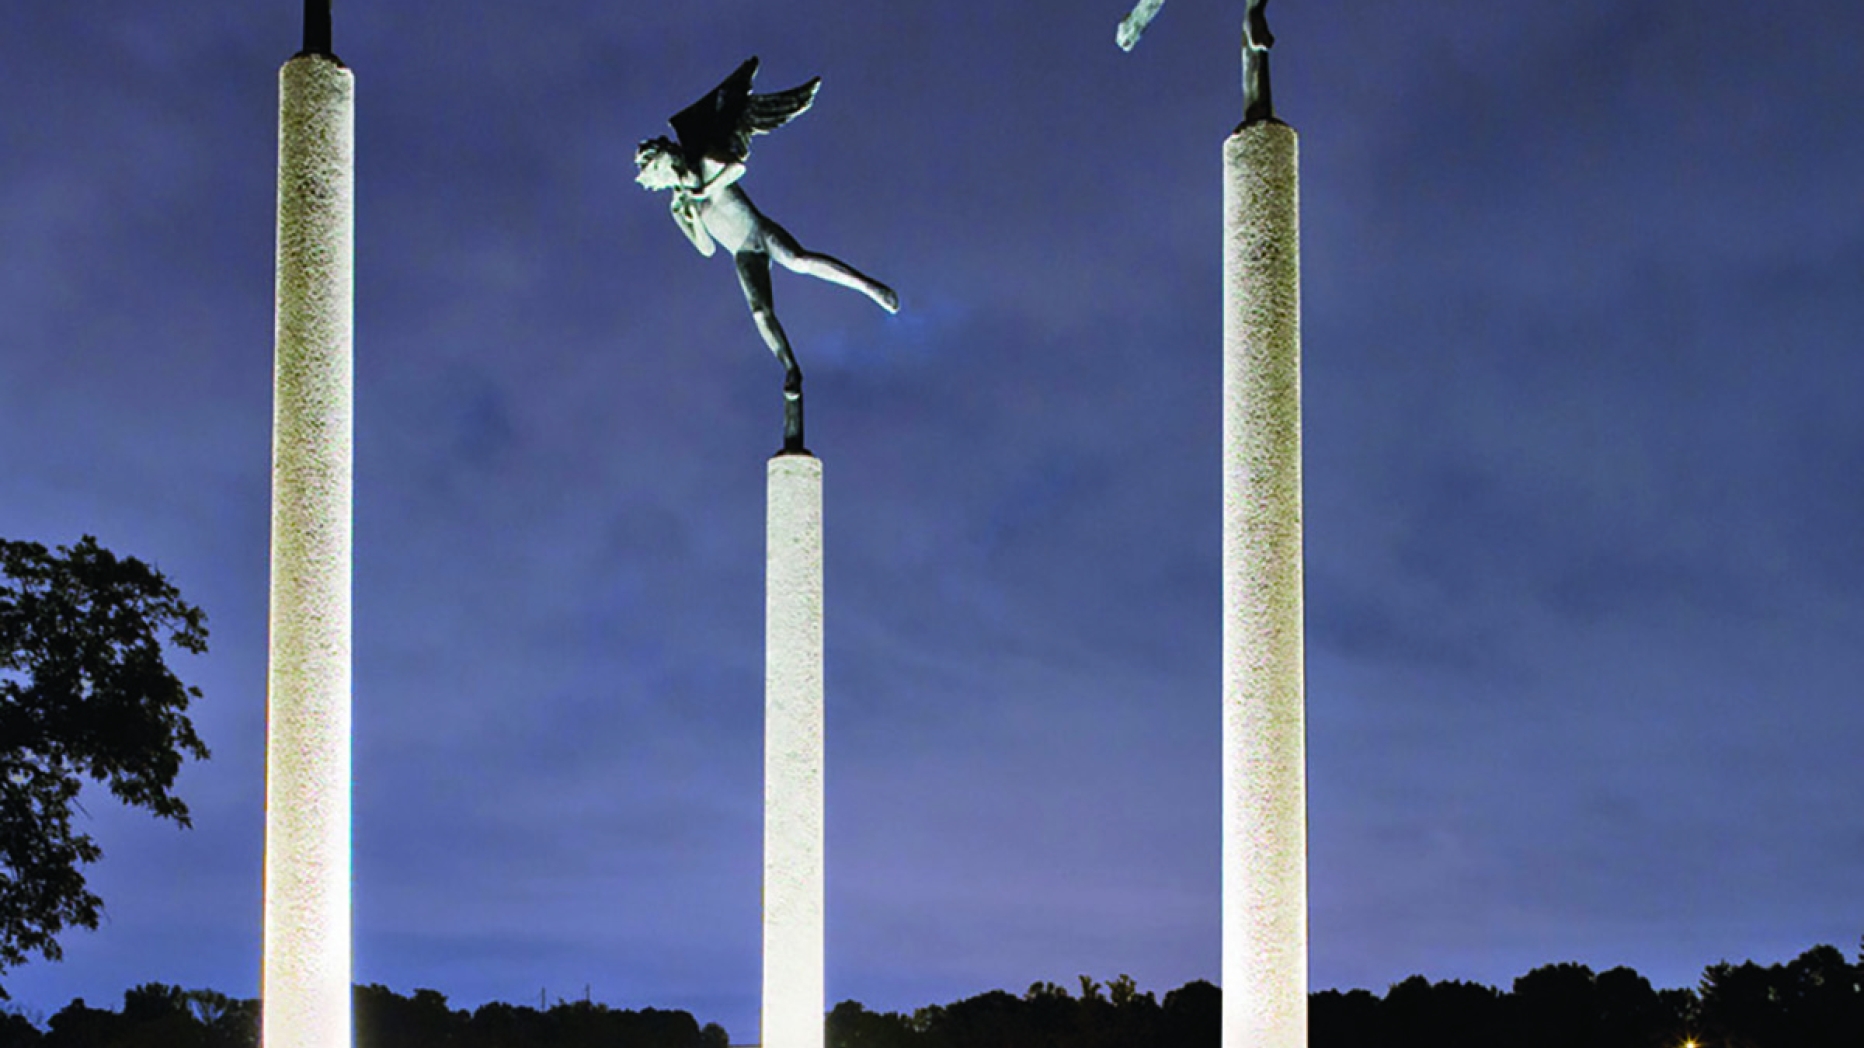 A series of sculptures displayed on the Schuylkill River.